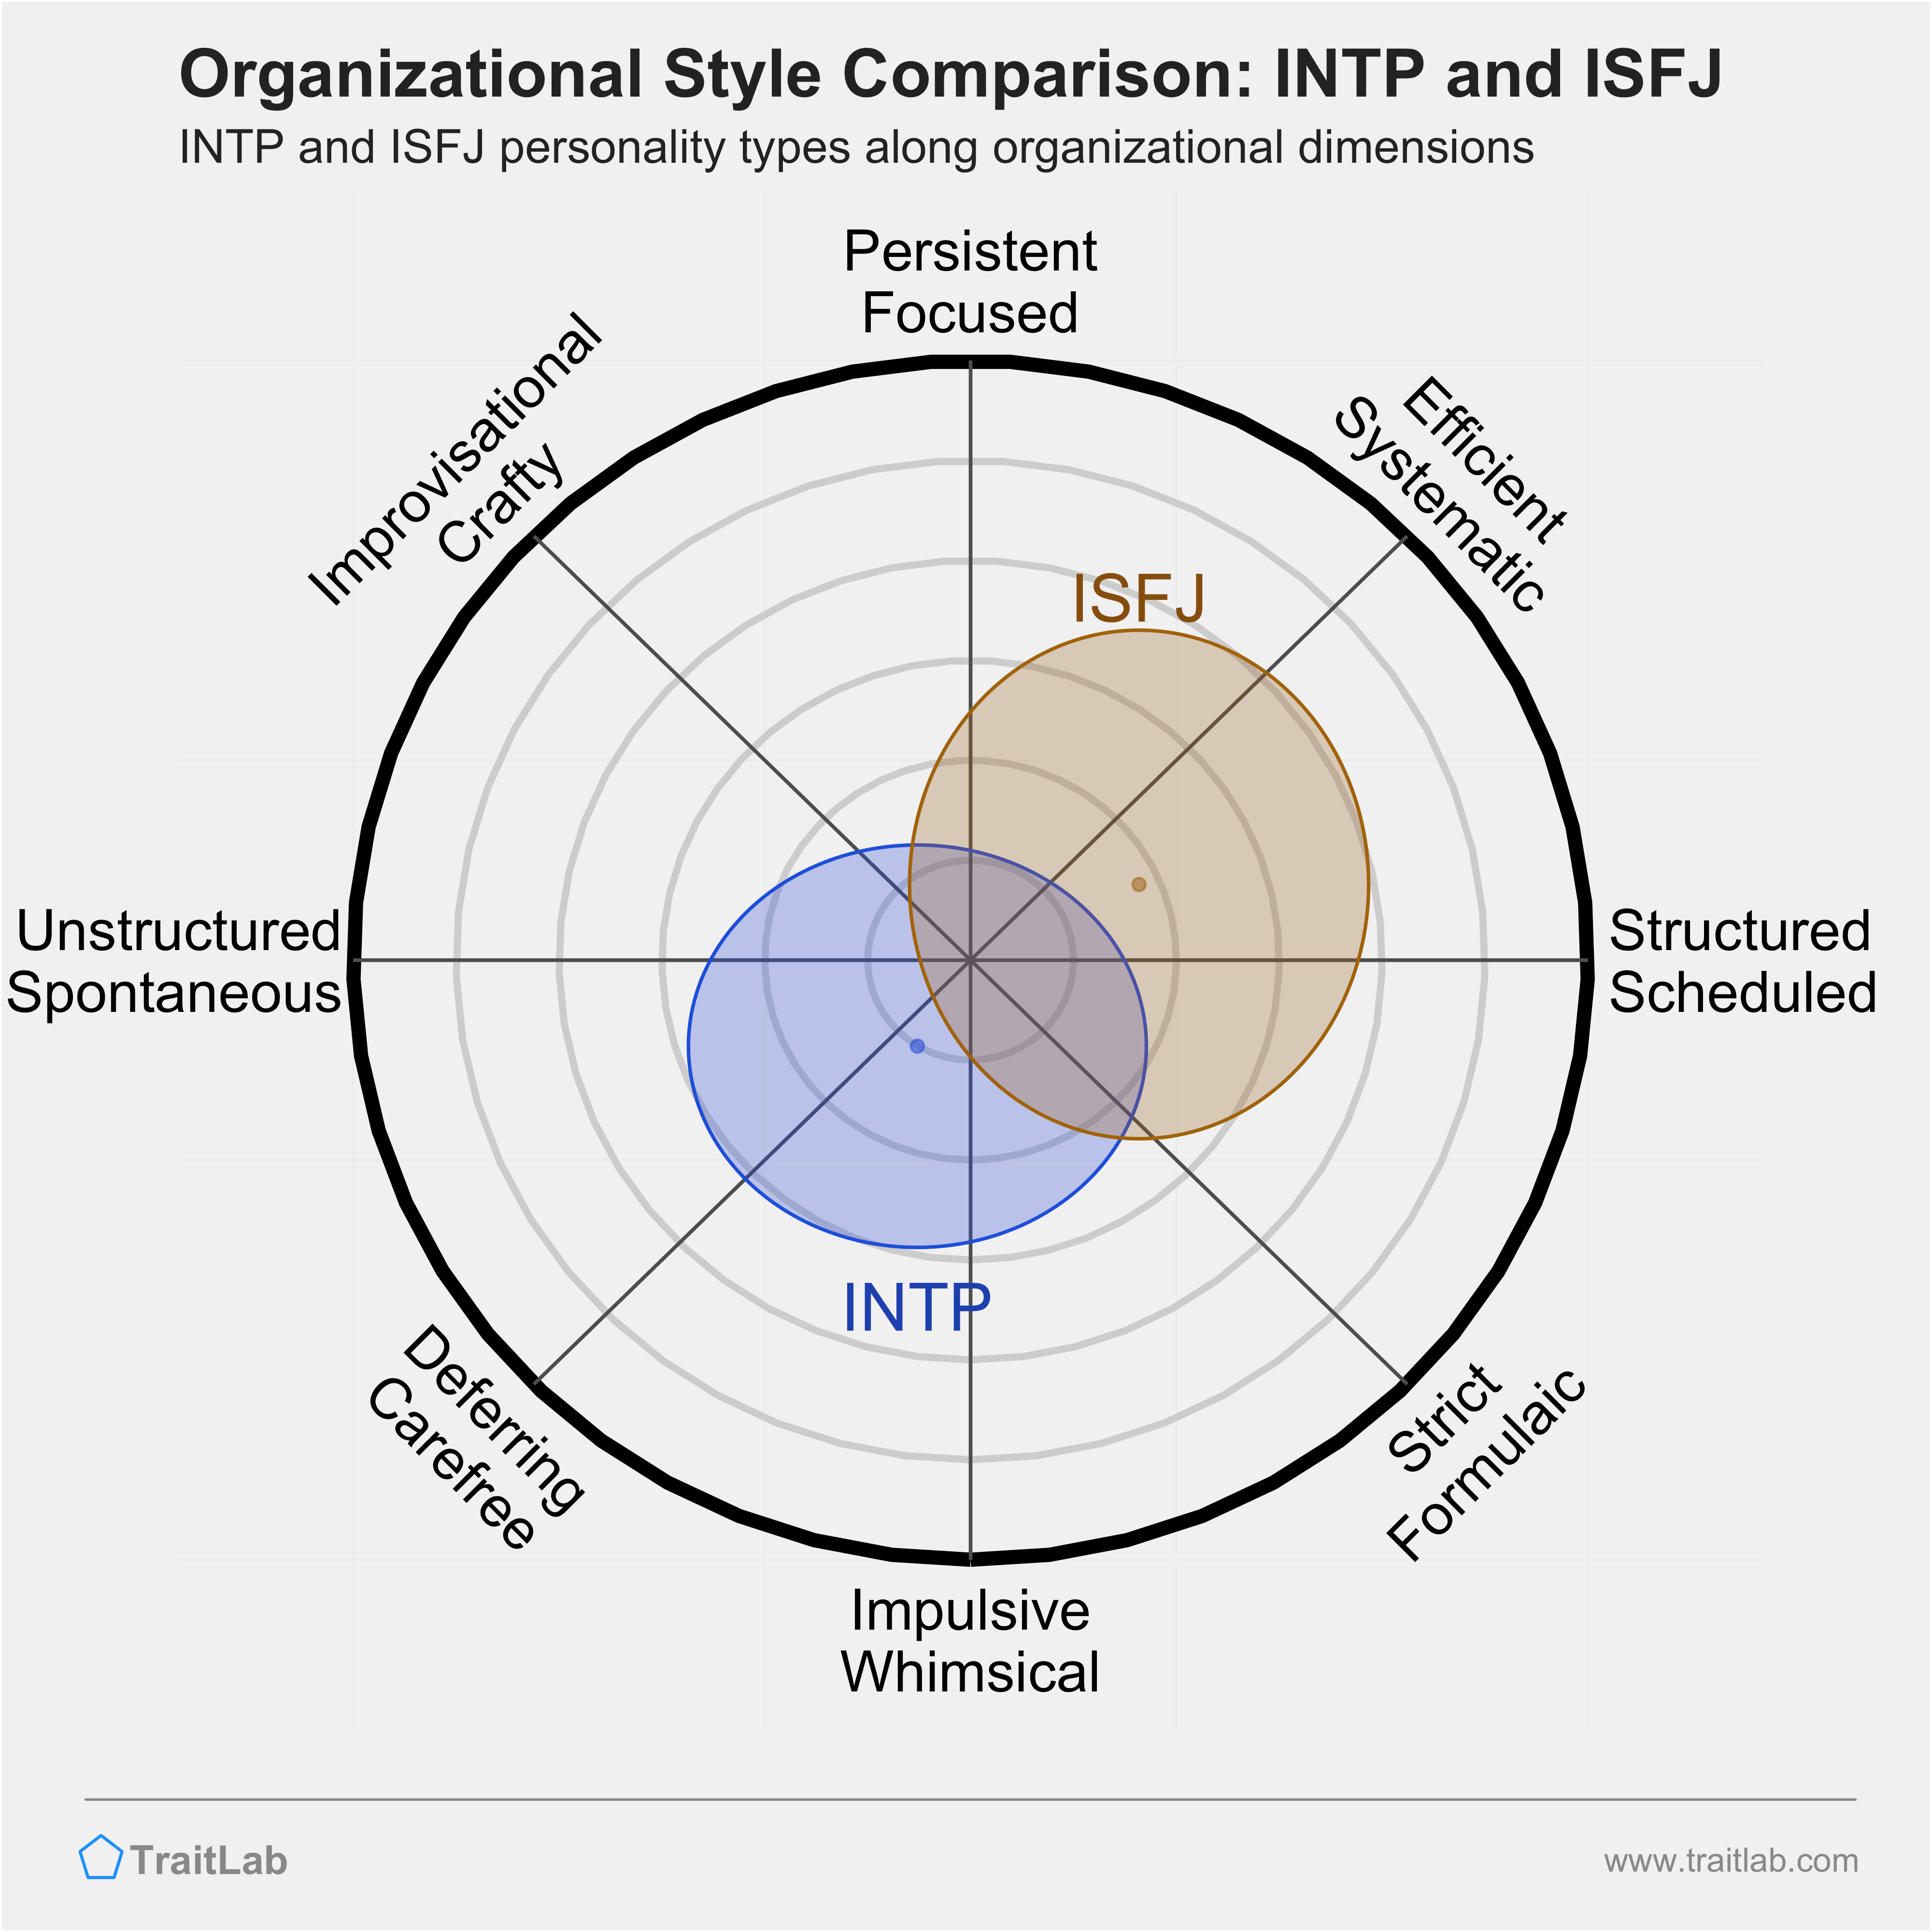 INTP and ISFJ comparison across organizational dimensions